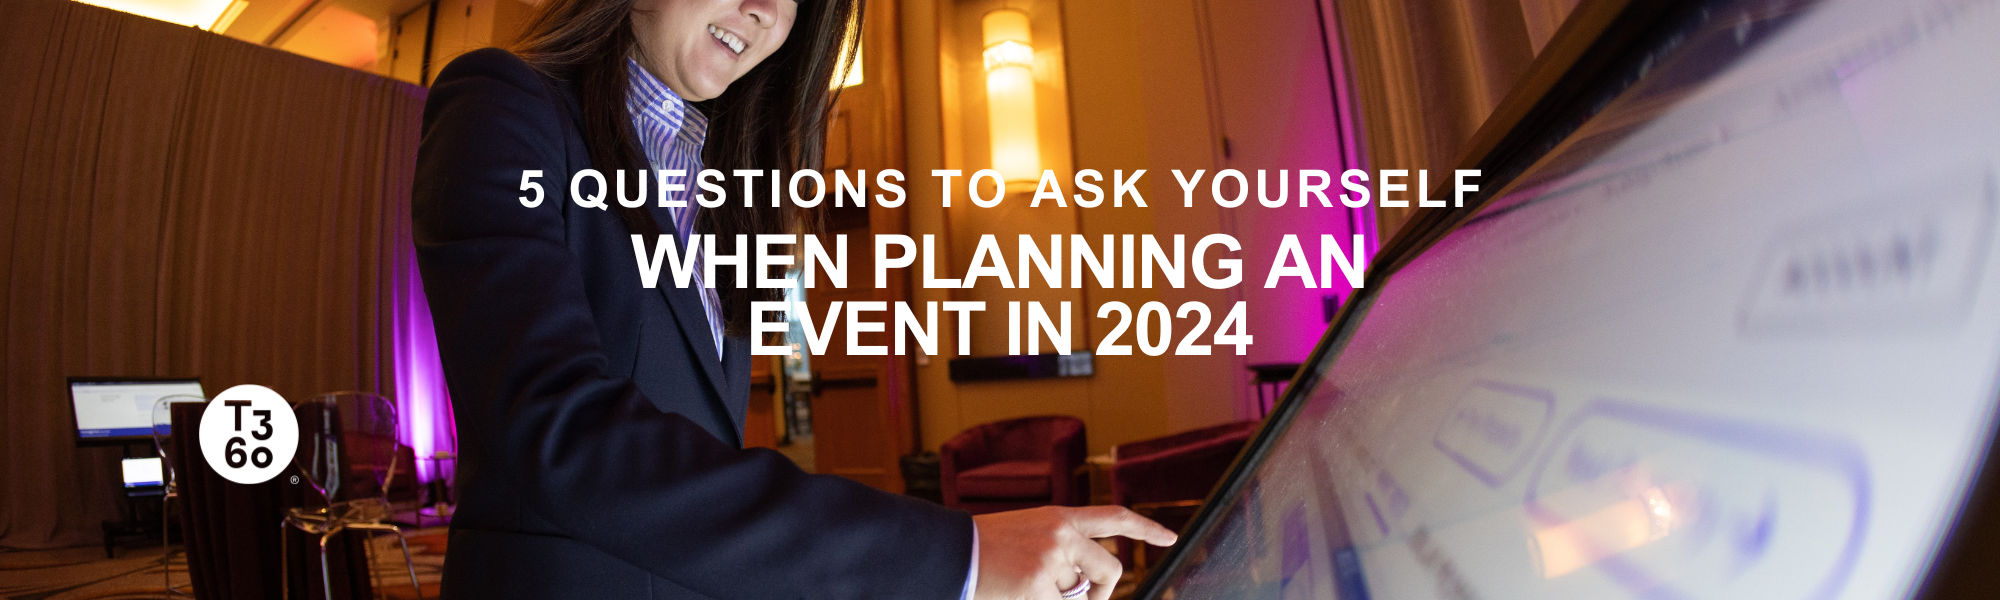 5 Questions to Ask Yourself When Planning 2024 Events